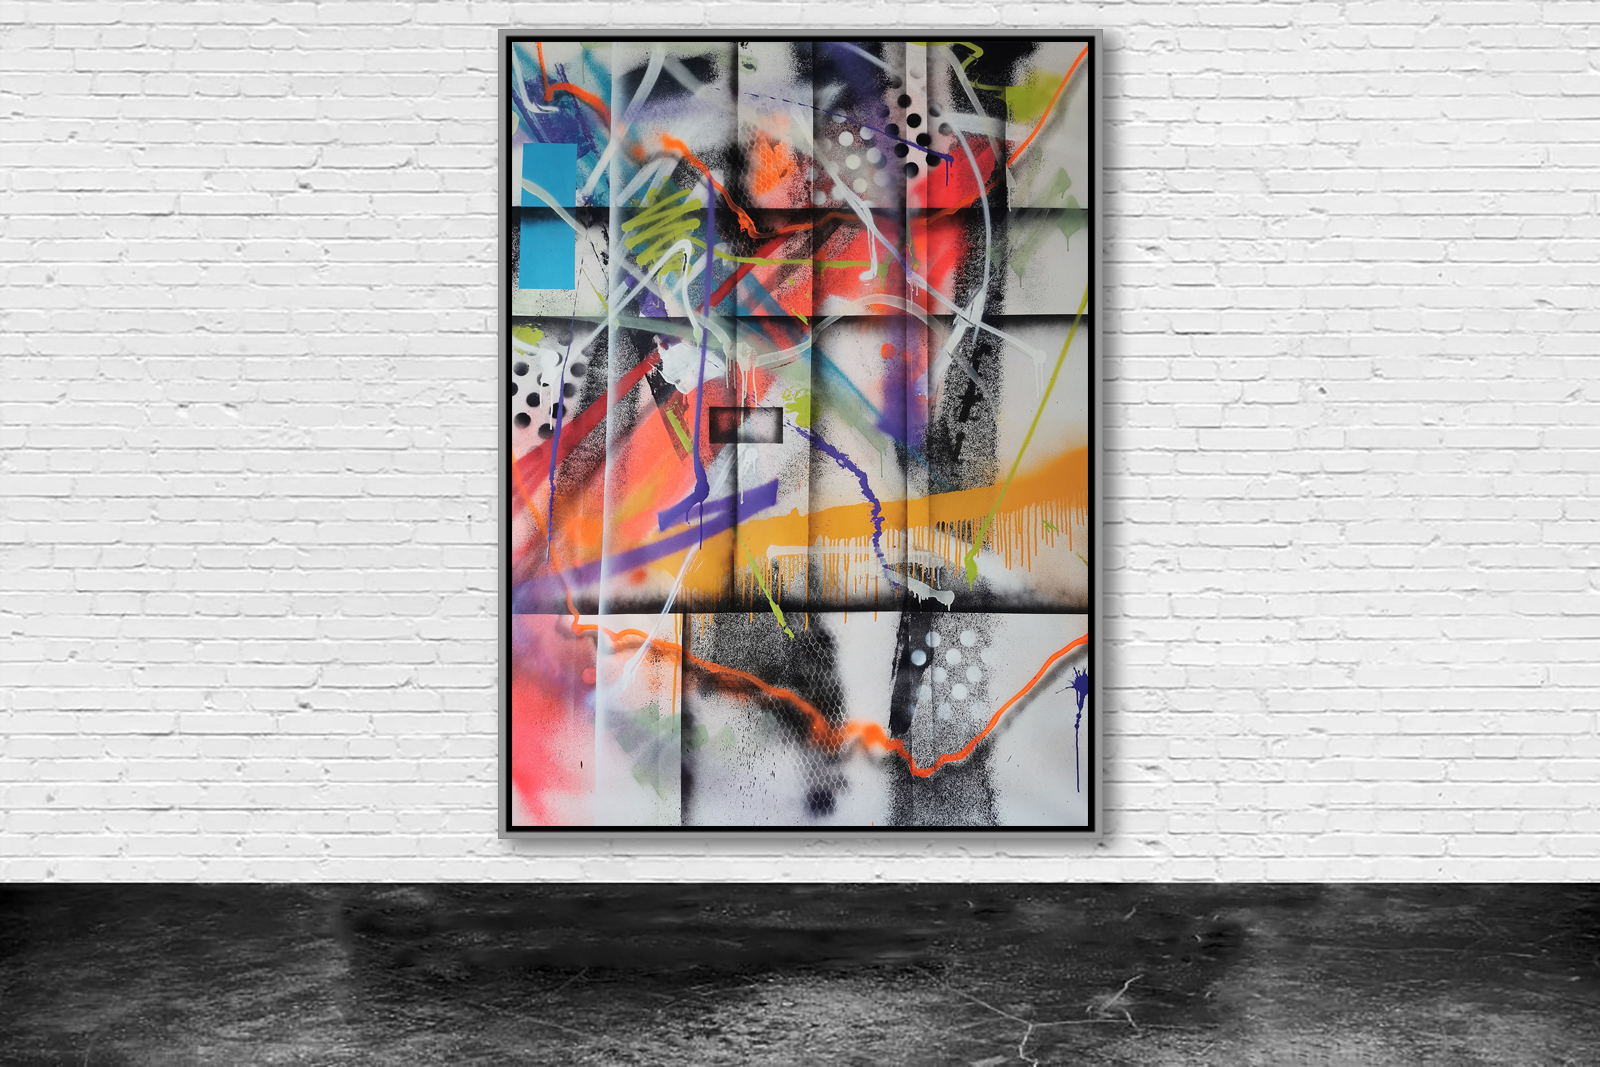 Visual Abstraction 0322 - 200 x 140 cm. 2022